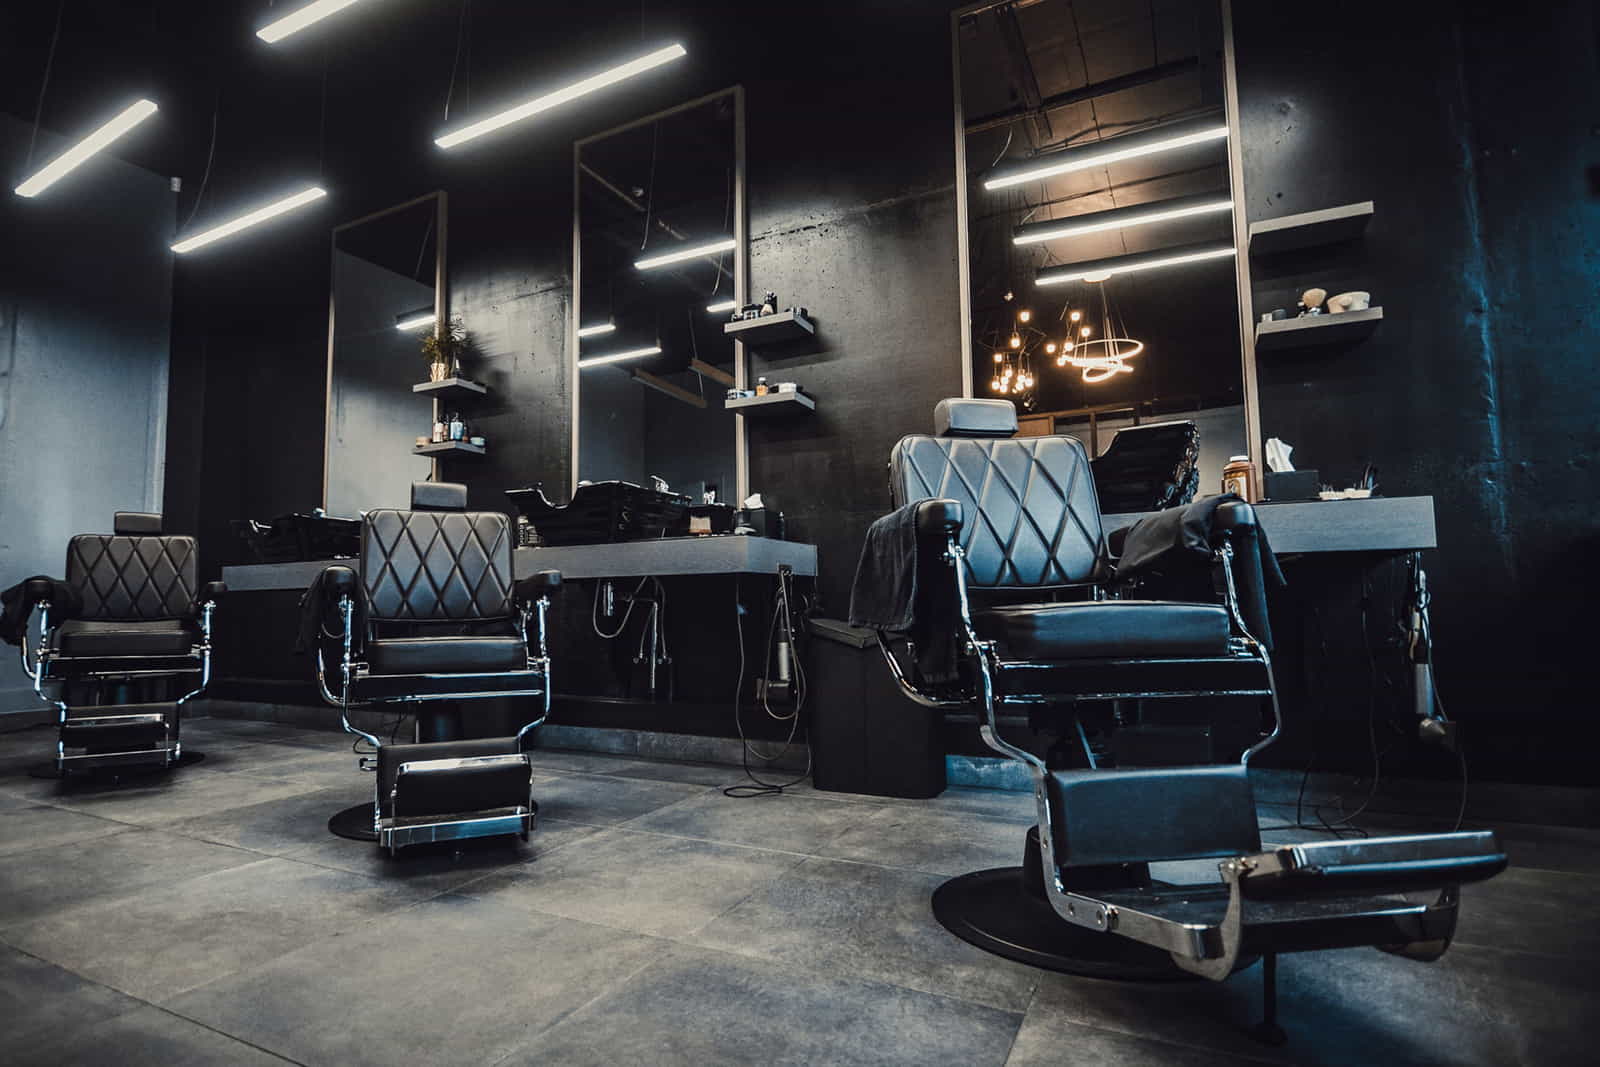 A serene barber shop interior, designed for relaxation and comfort